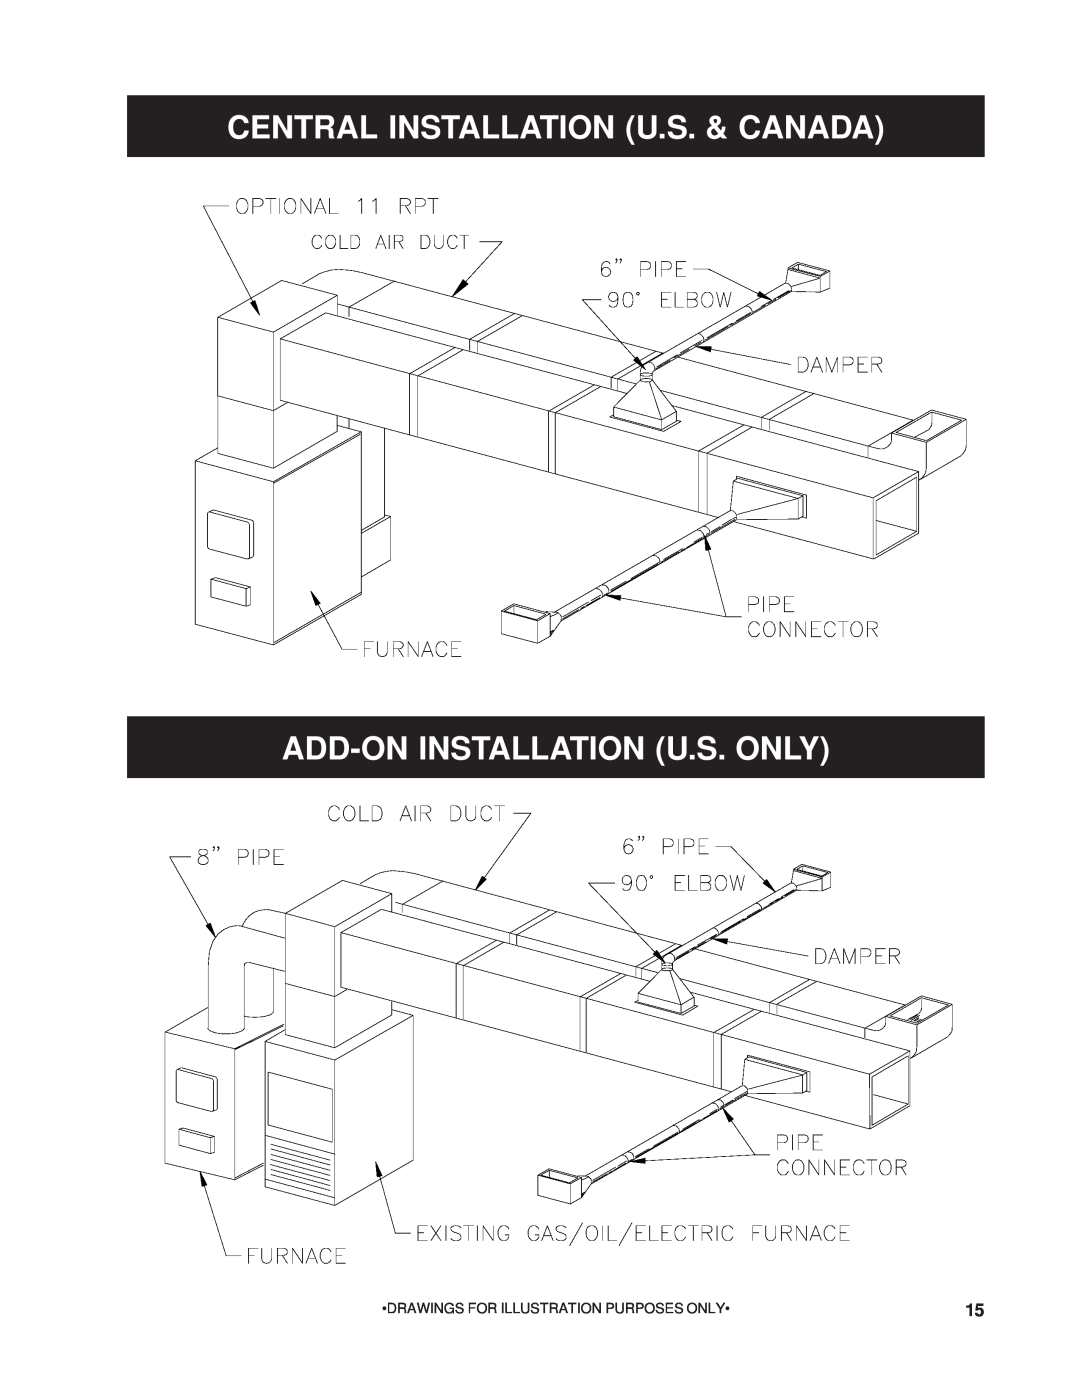 United States Stove 1200G owner manual Central Installation U.S. & Canada, Add-Oninstallation U.S. Only 